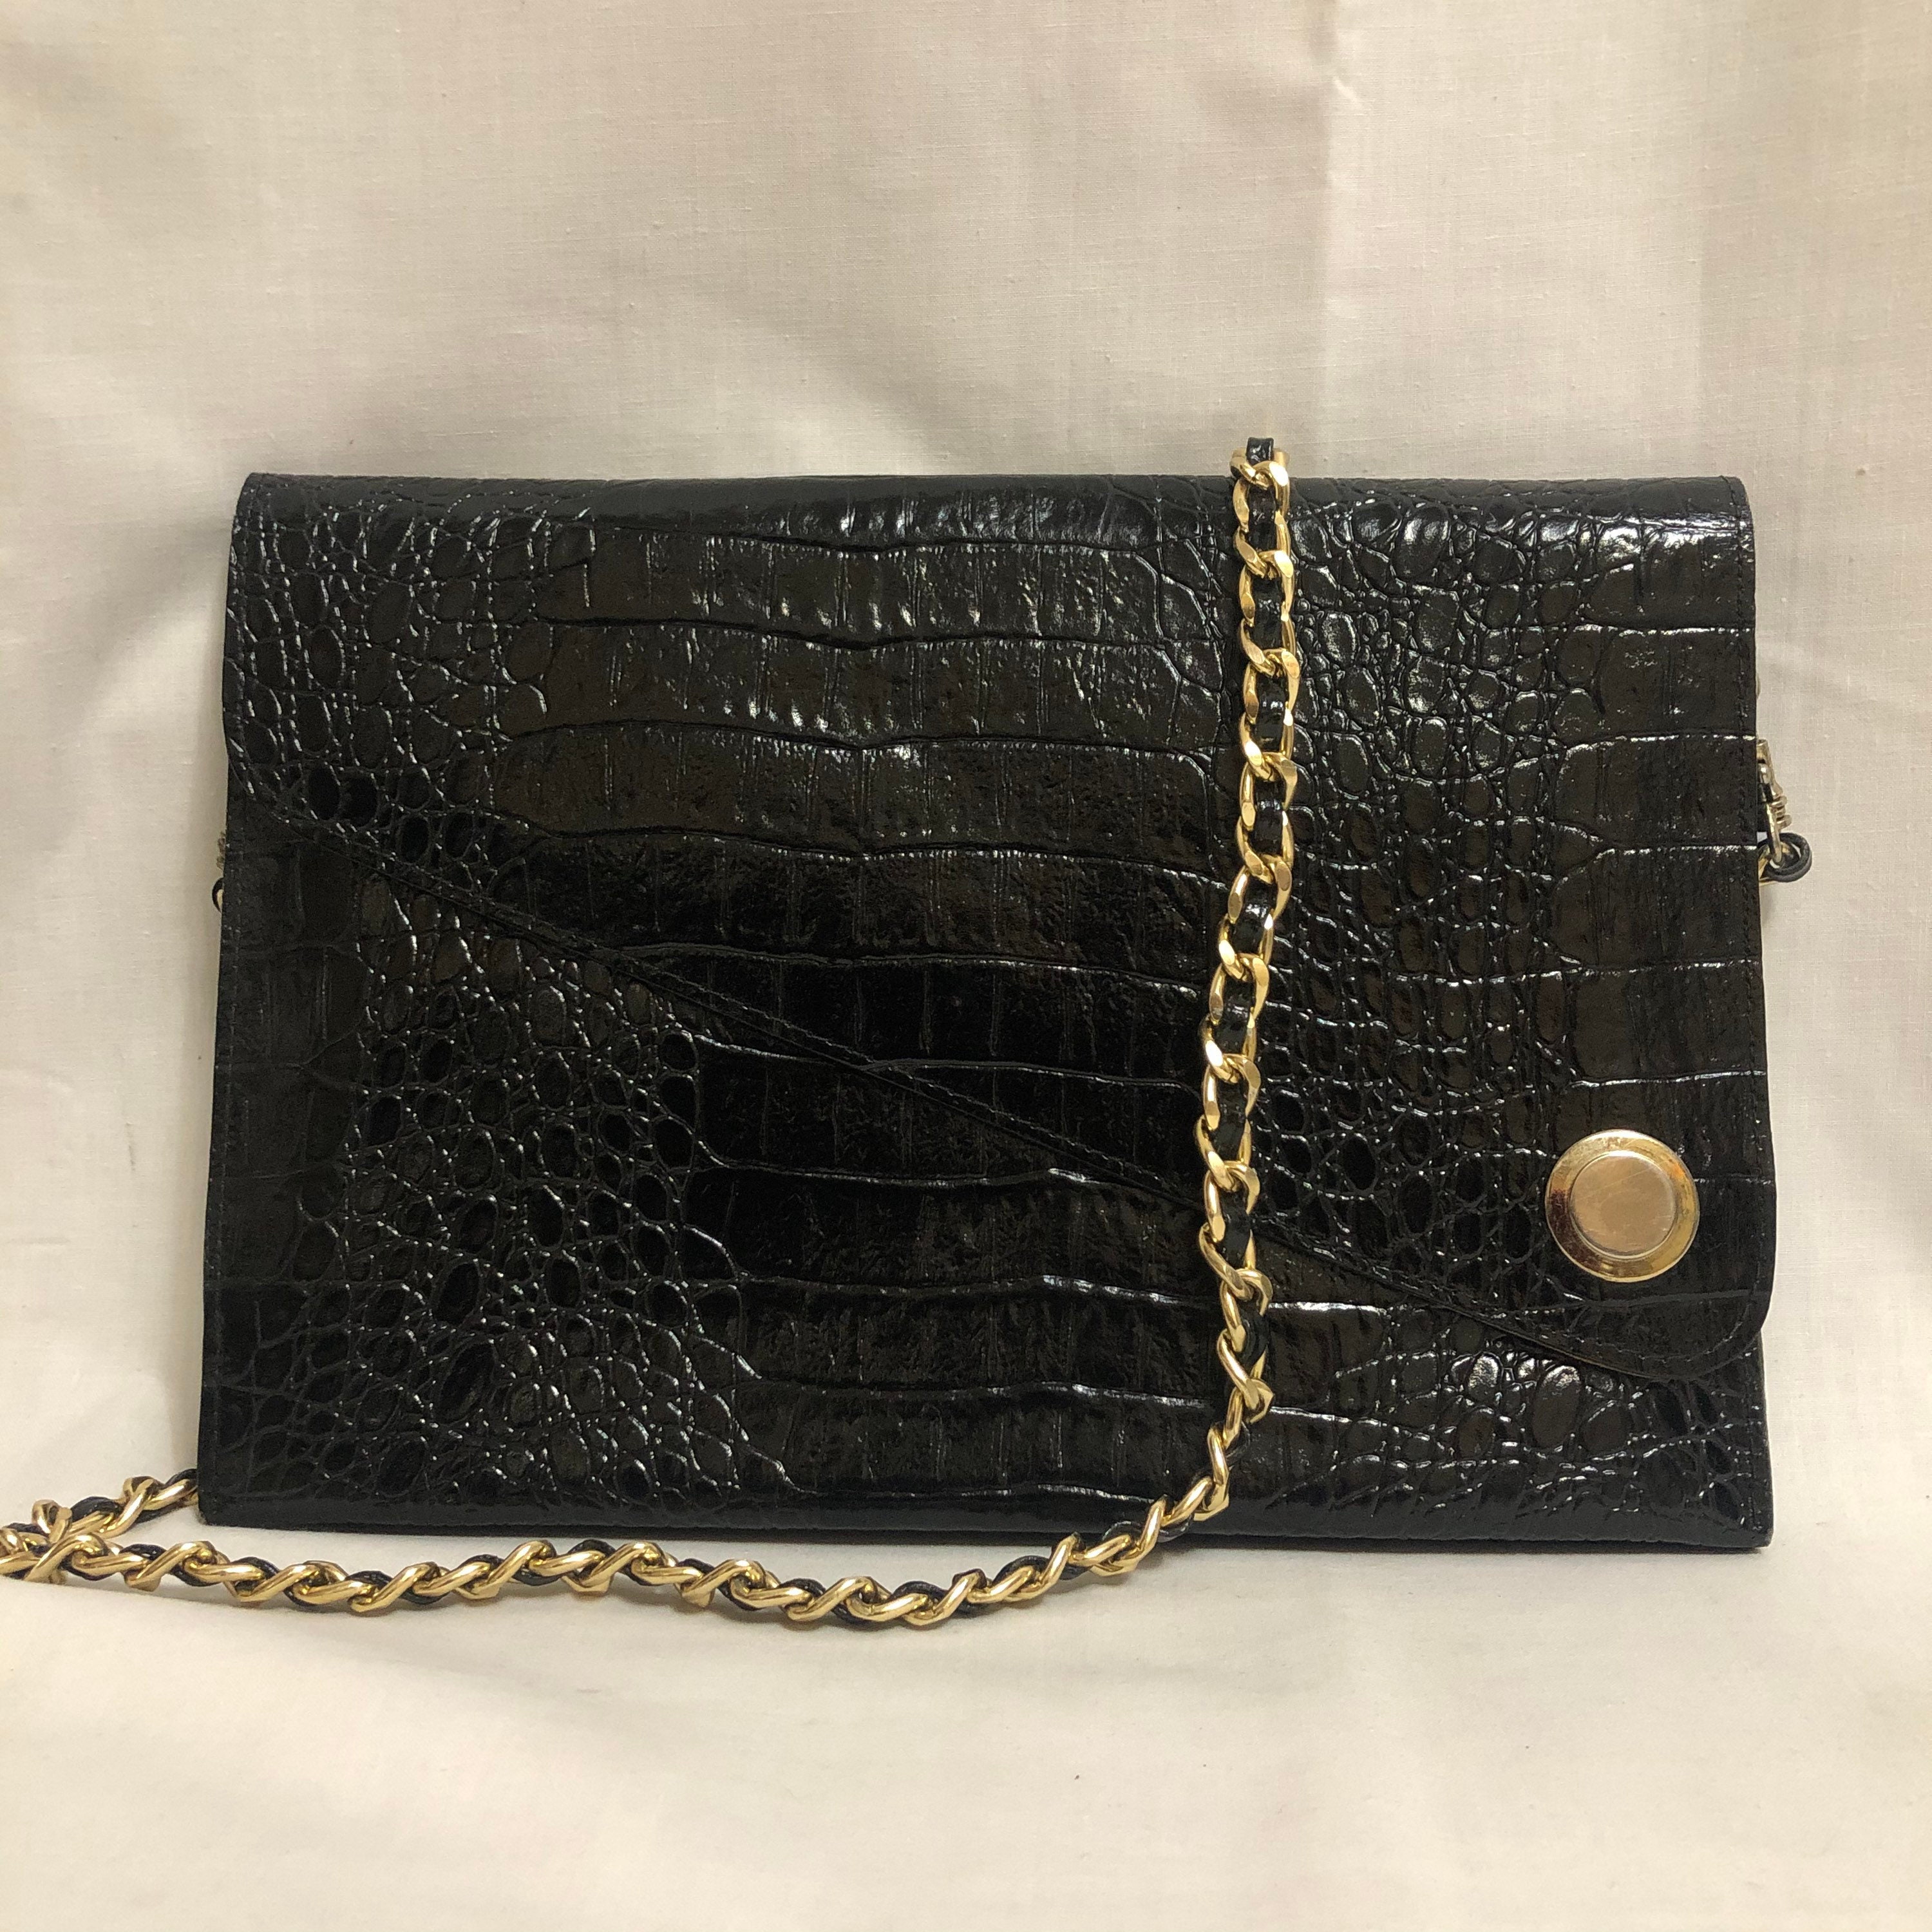 Convertible Executive Leather Bag in Noir Crocodile Print Black – Black  Owned Everything